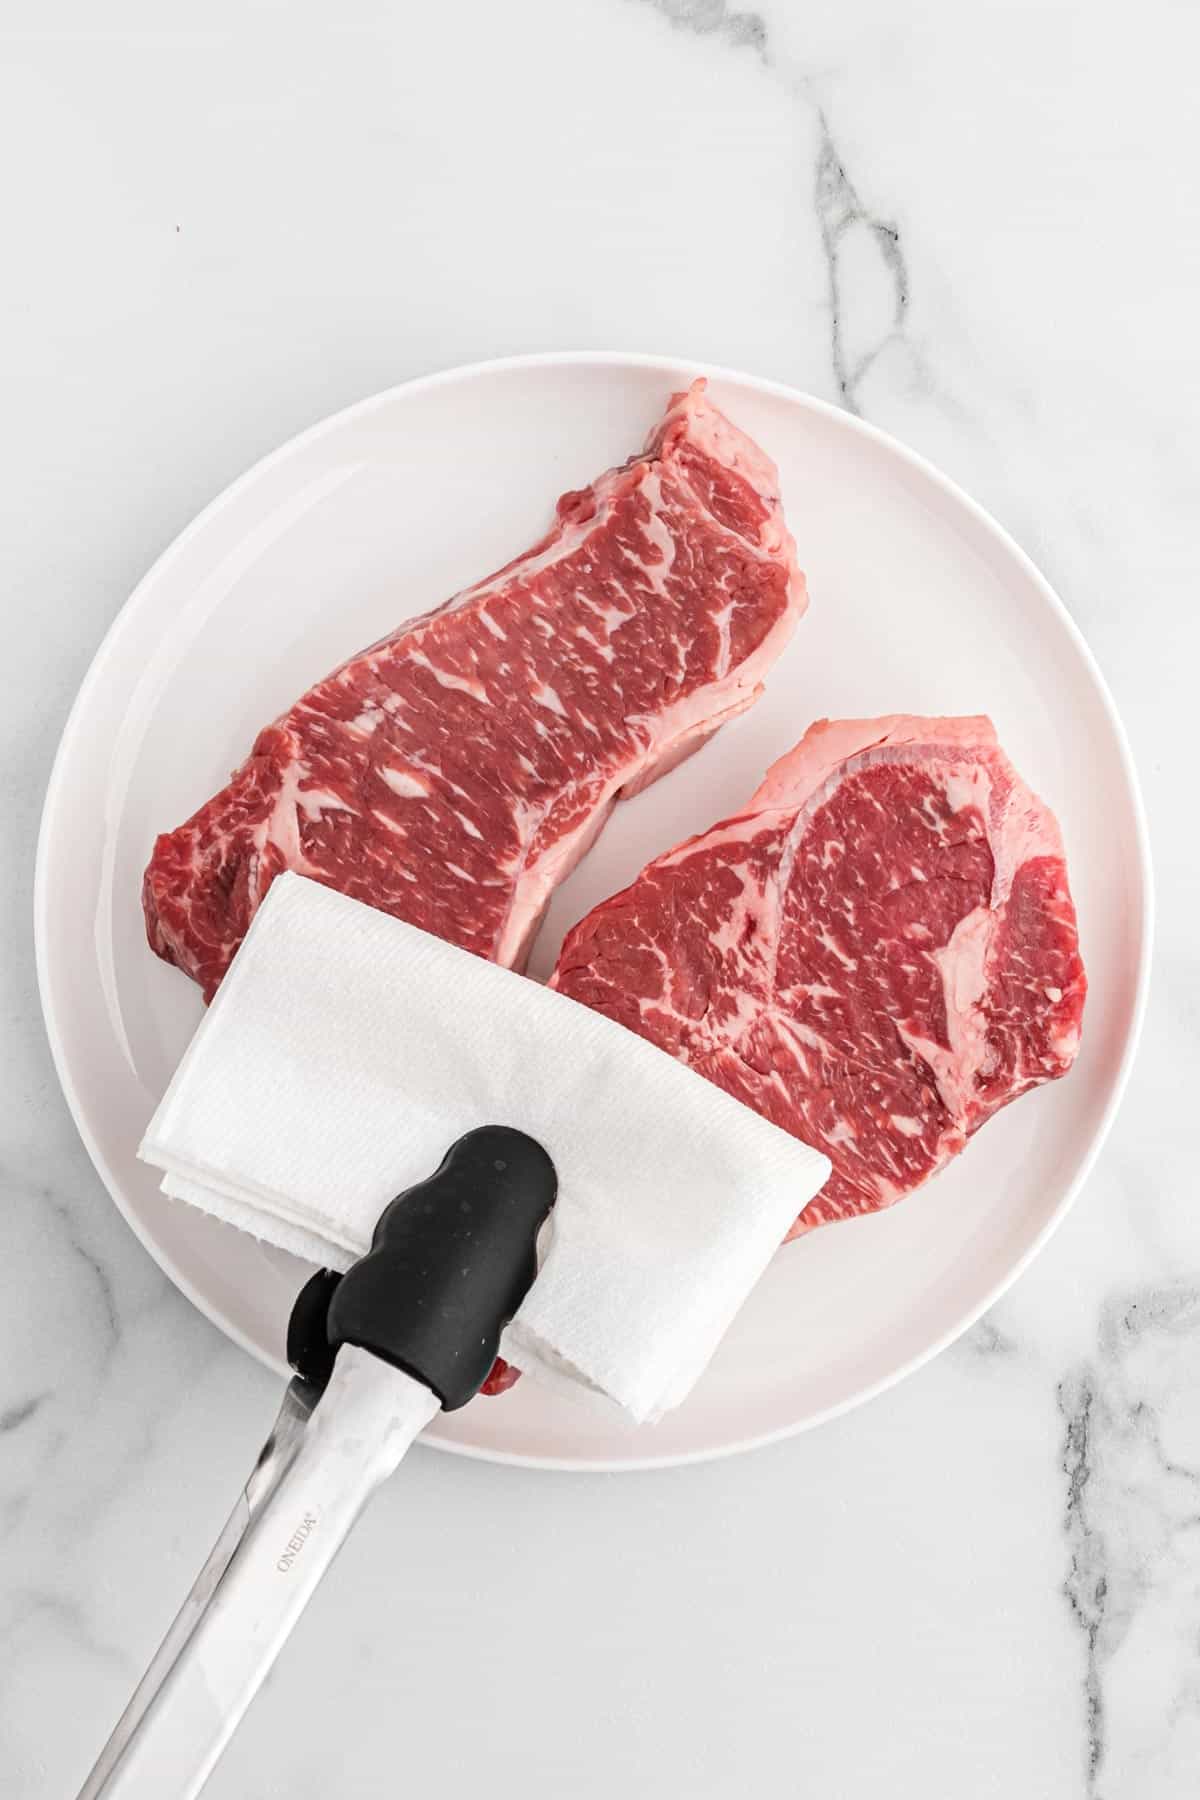 Using a napkin to pat dry steaks on a plate.